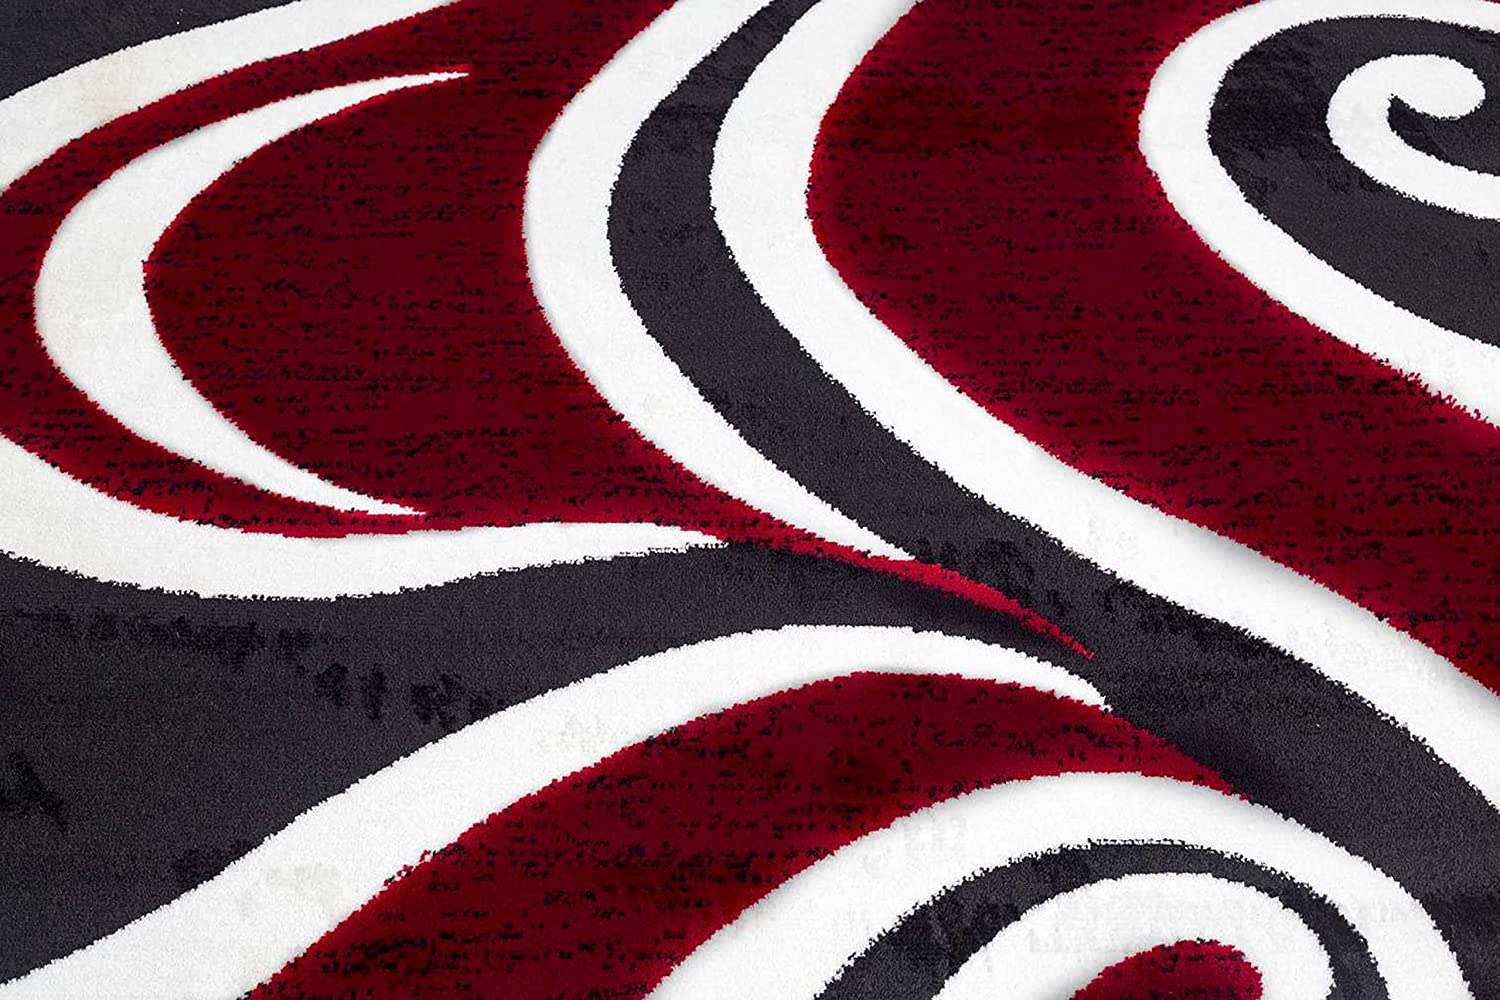  3X8 Frize Collection Modern Red Black White Area Rug